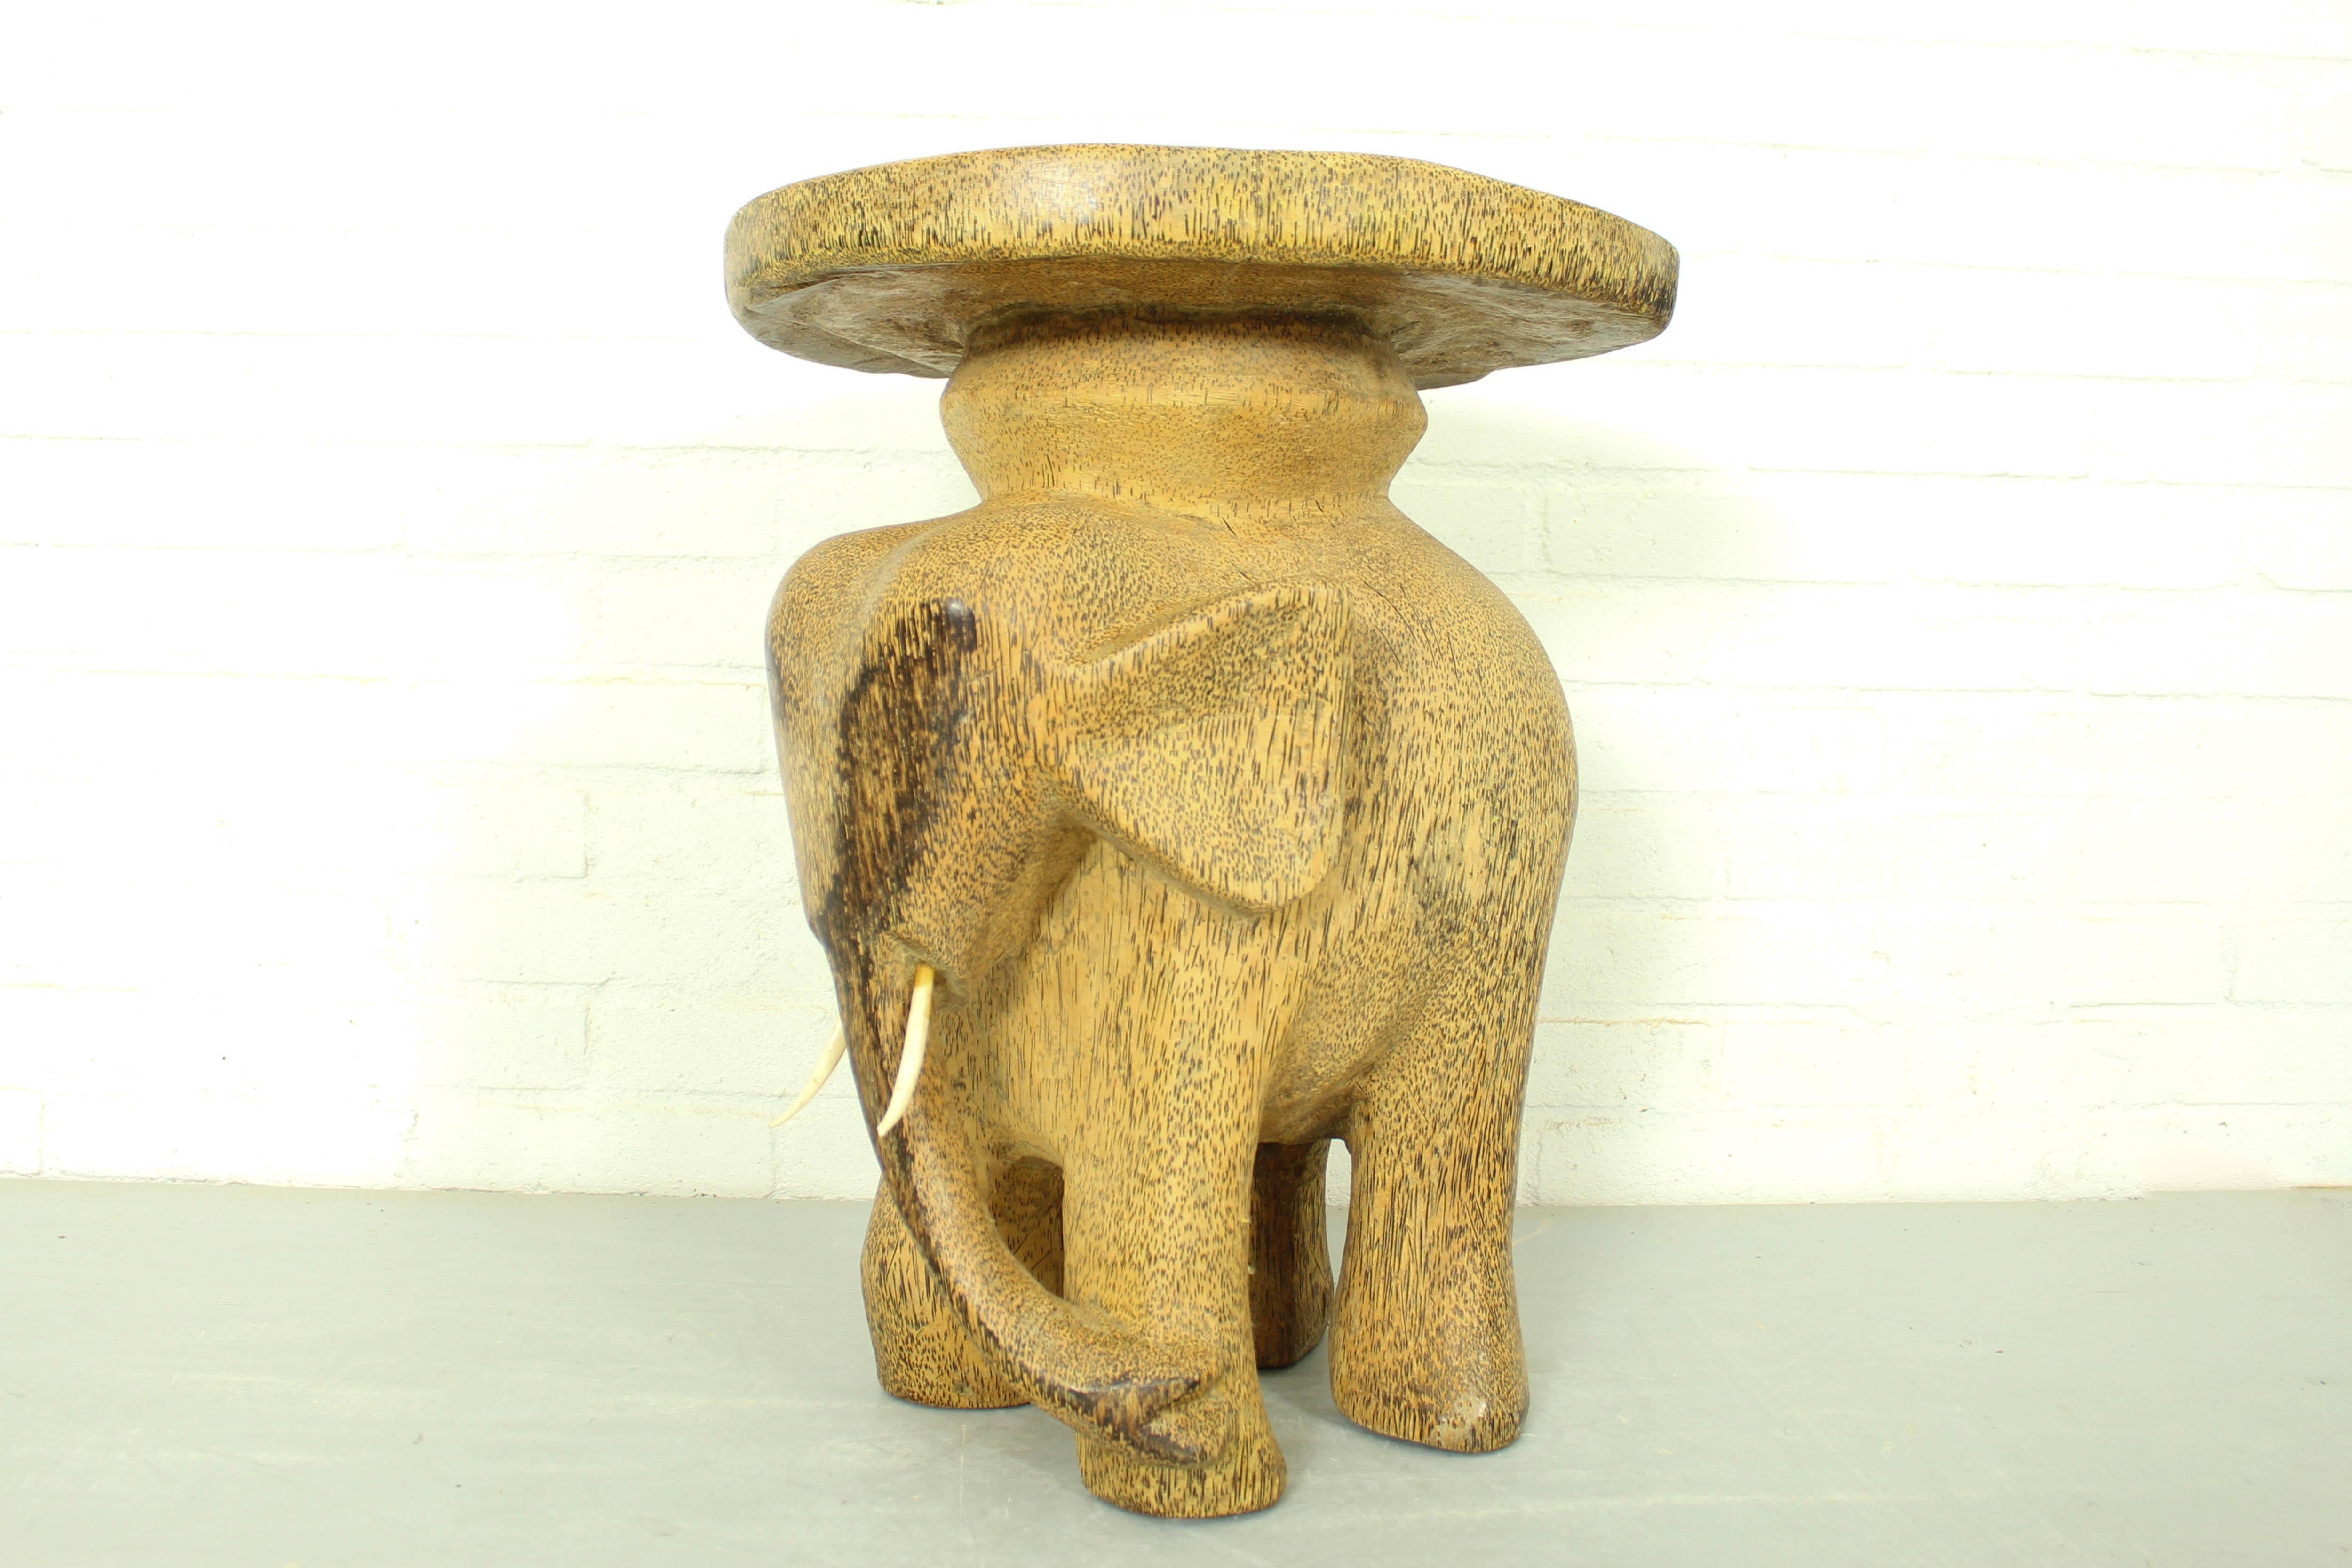 This beautiful Hollywood Regency elephant would make a great side table, stool or plant stand in your living room, sun room or garden room. 

Dimensions: 52cm h, 41cm d, 38cm w.